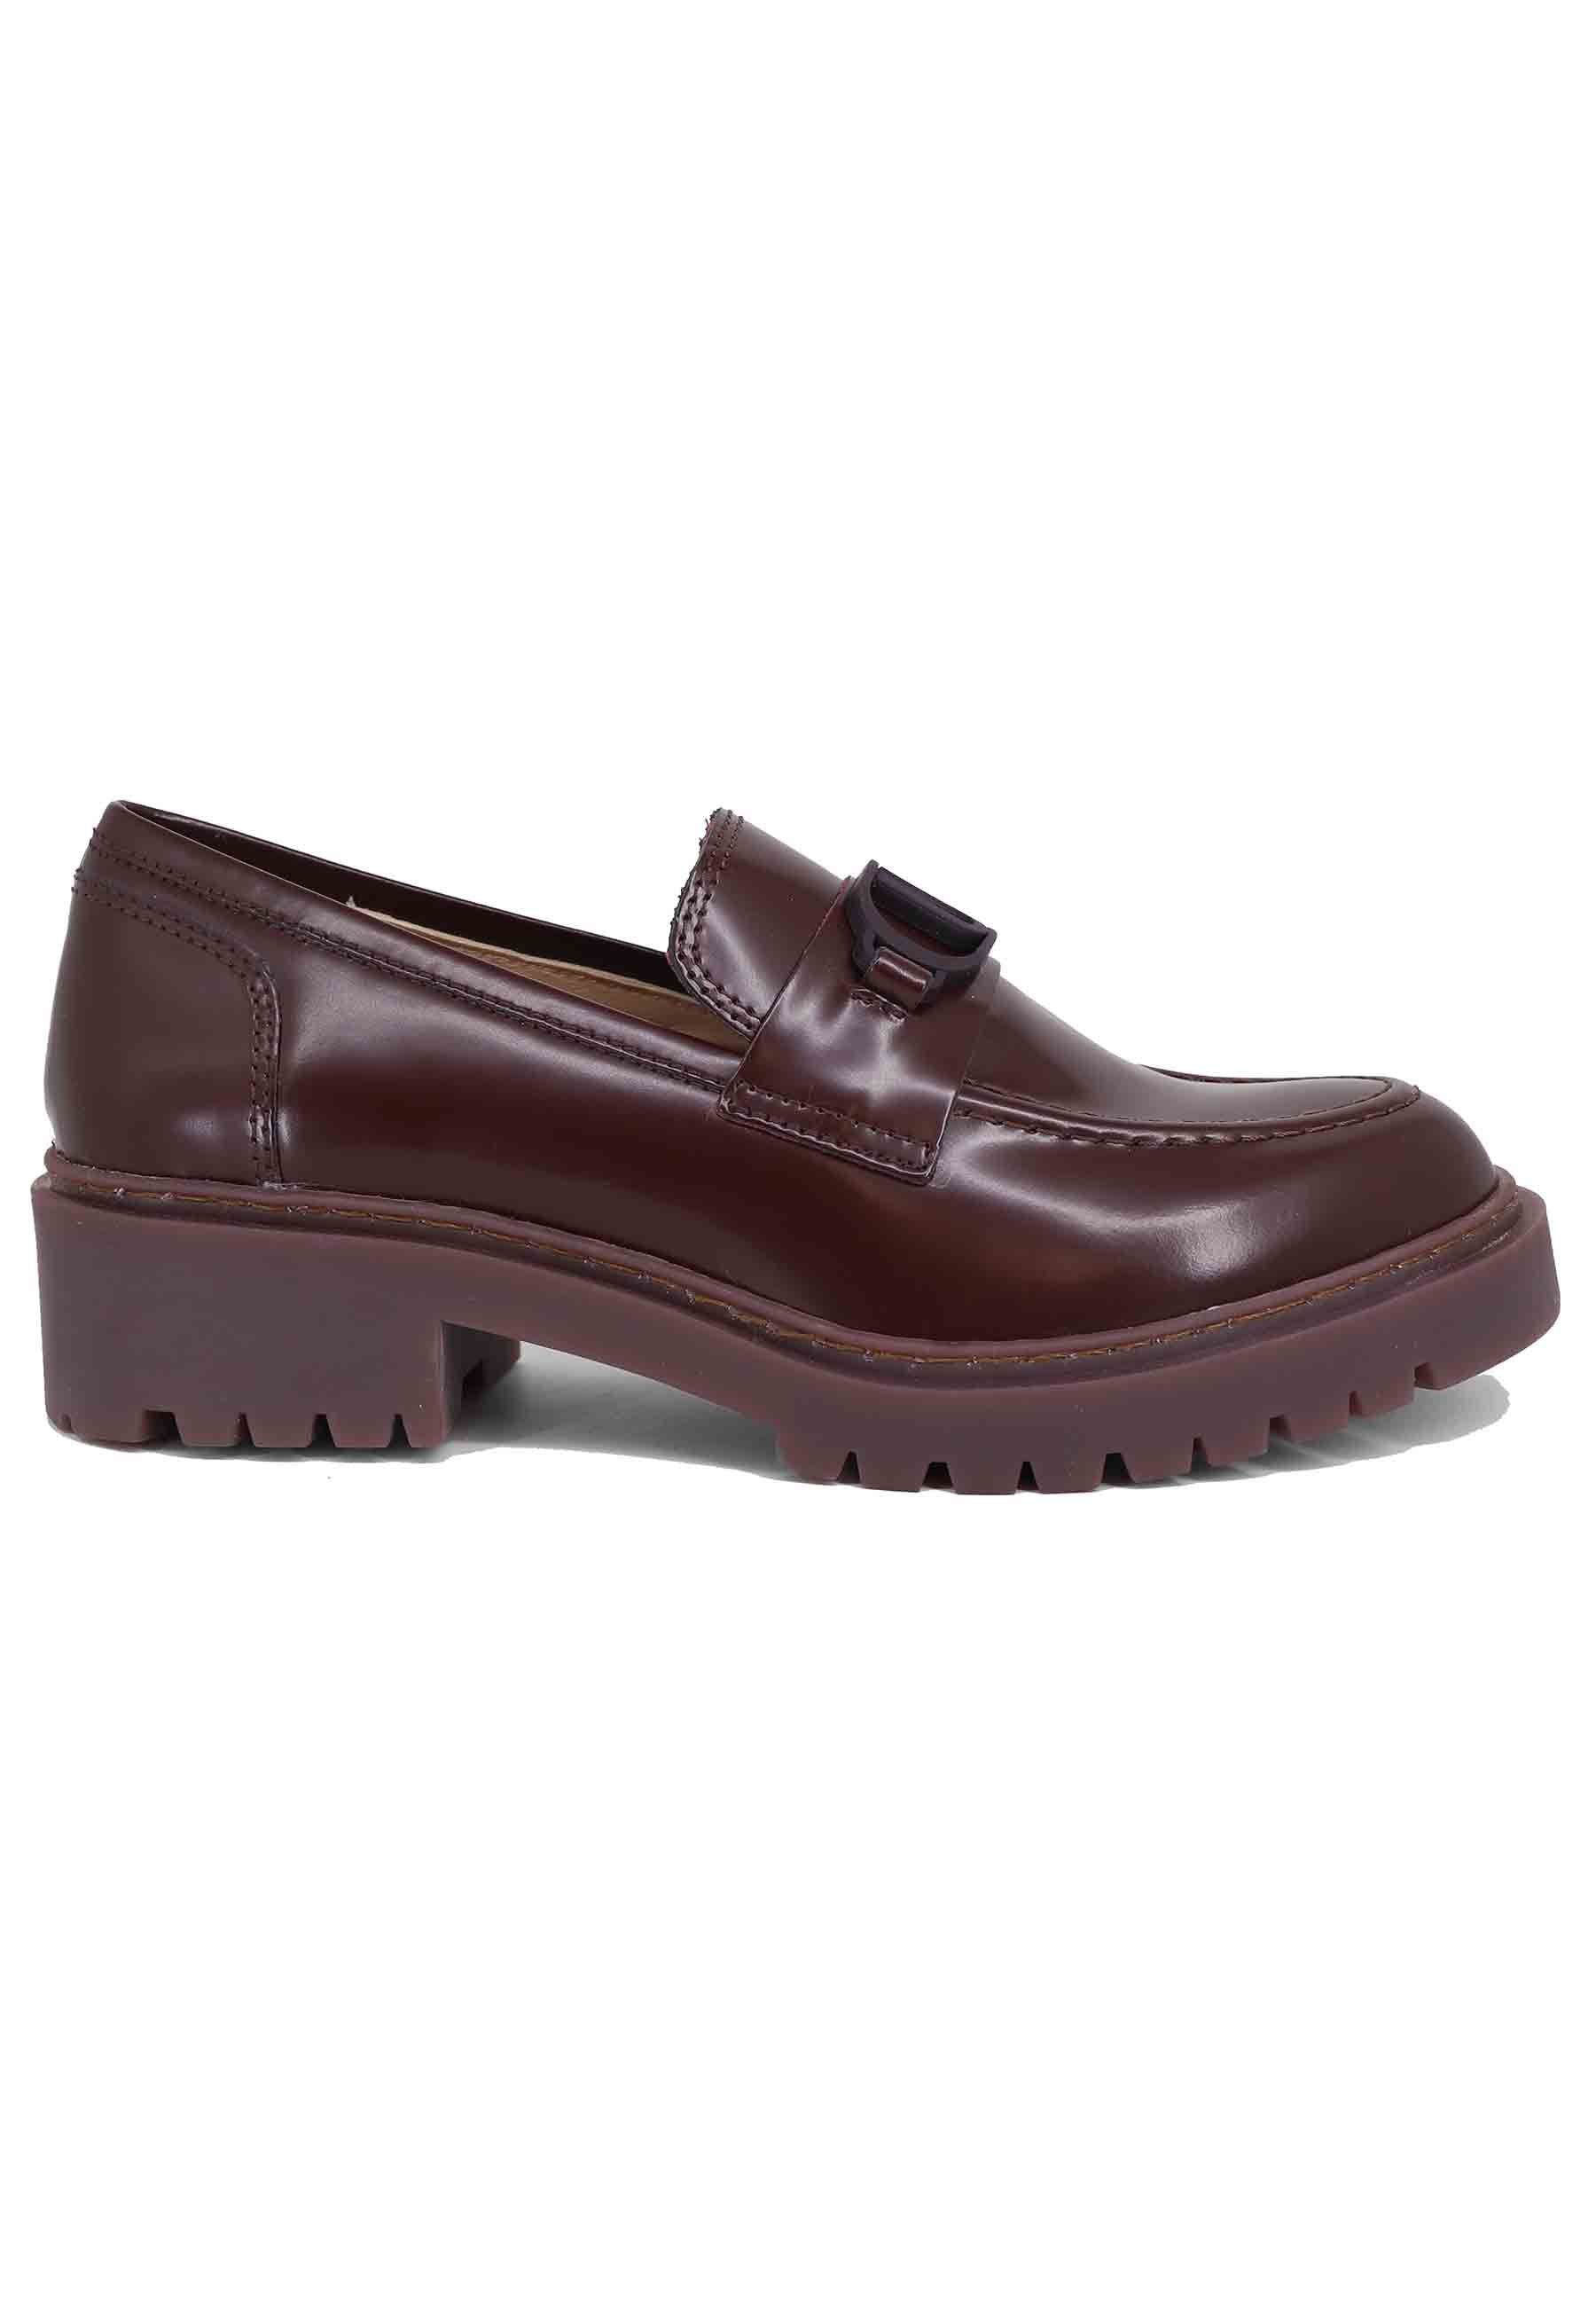 Women's moccasins in burgundy leather with lug sole